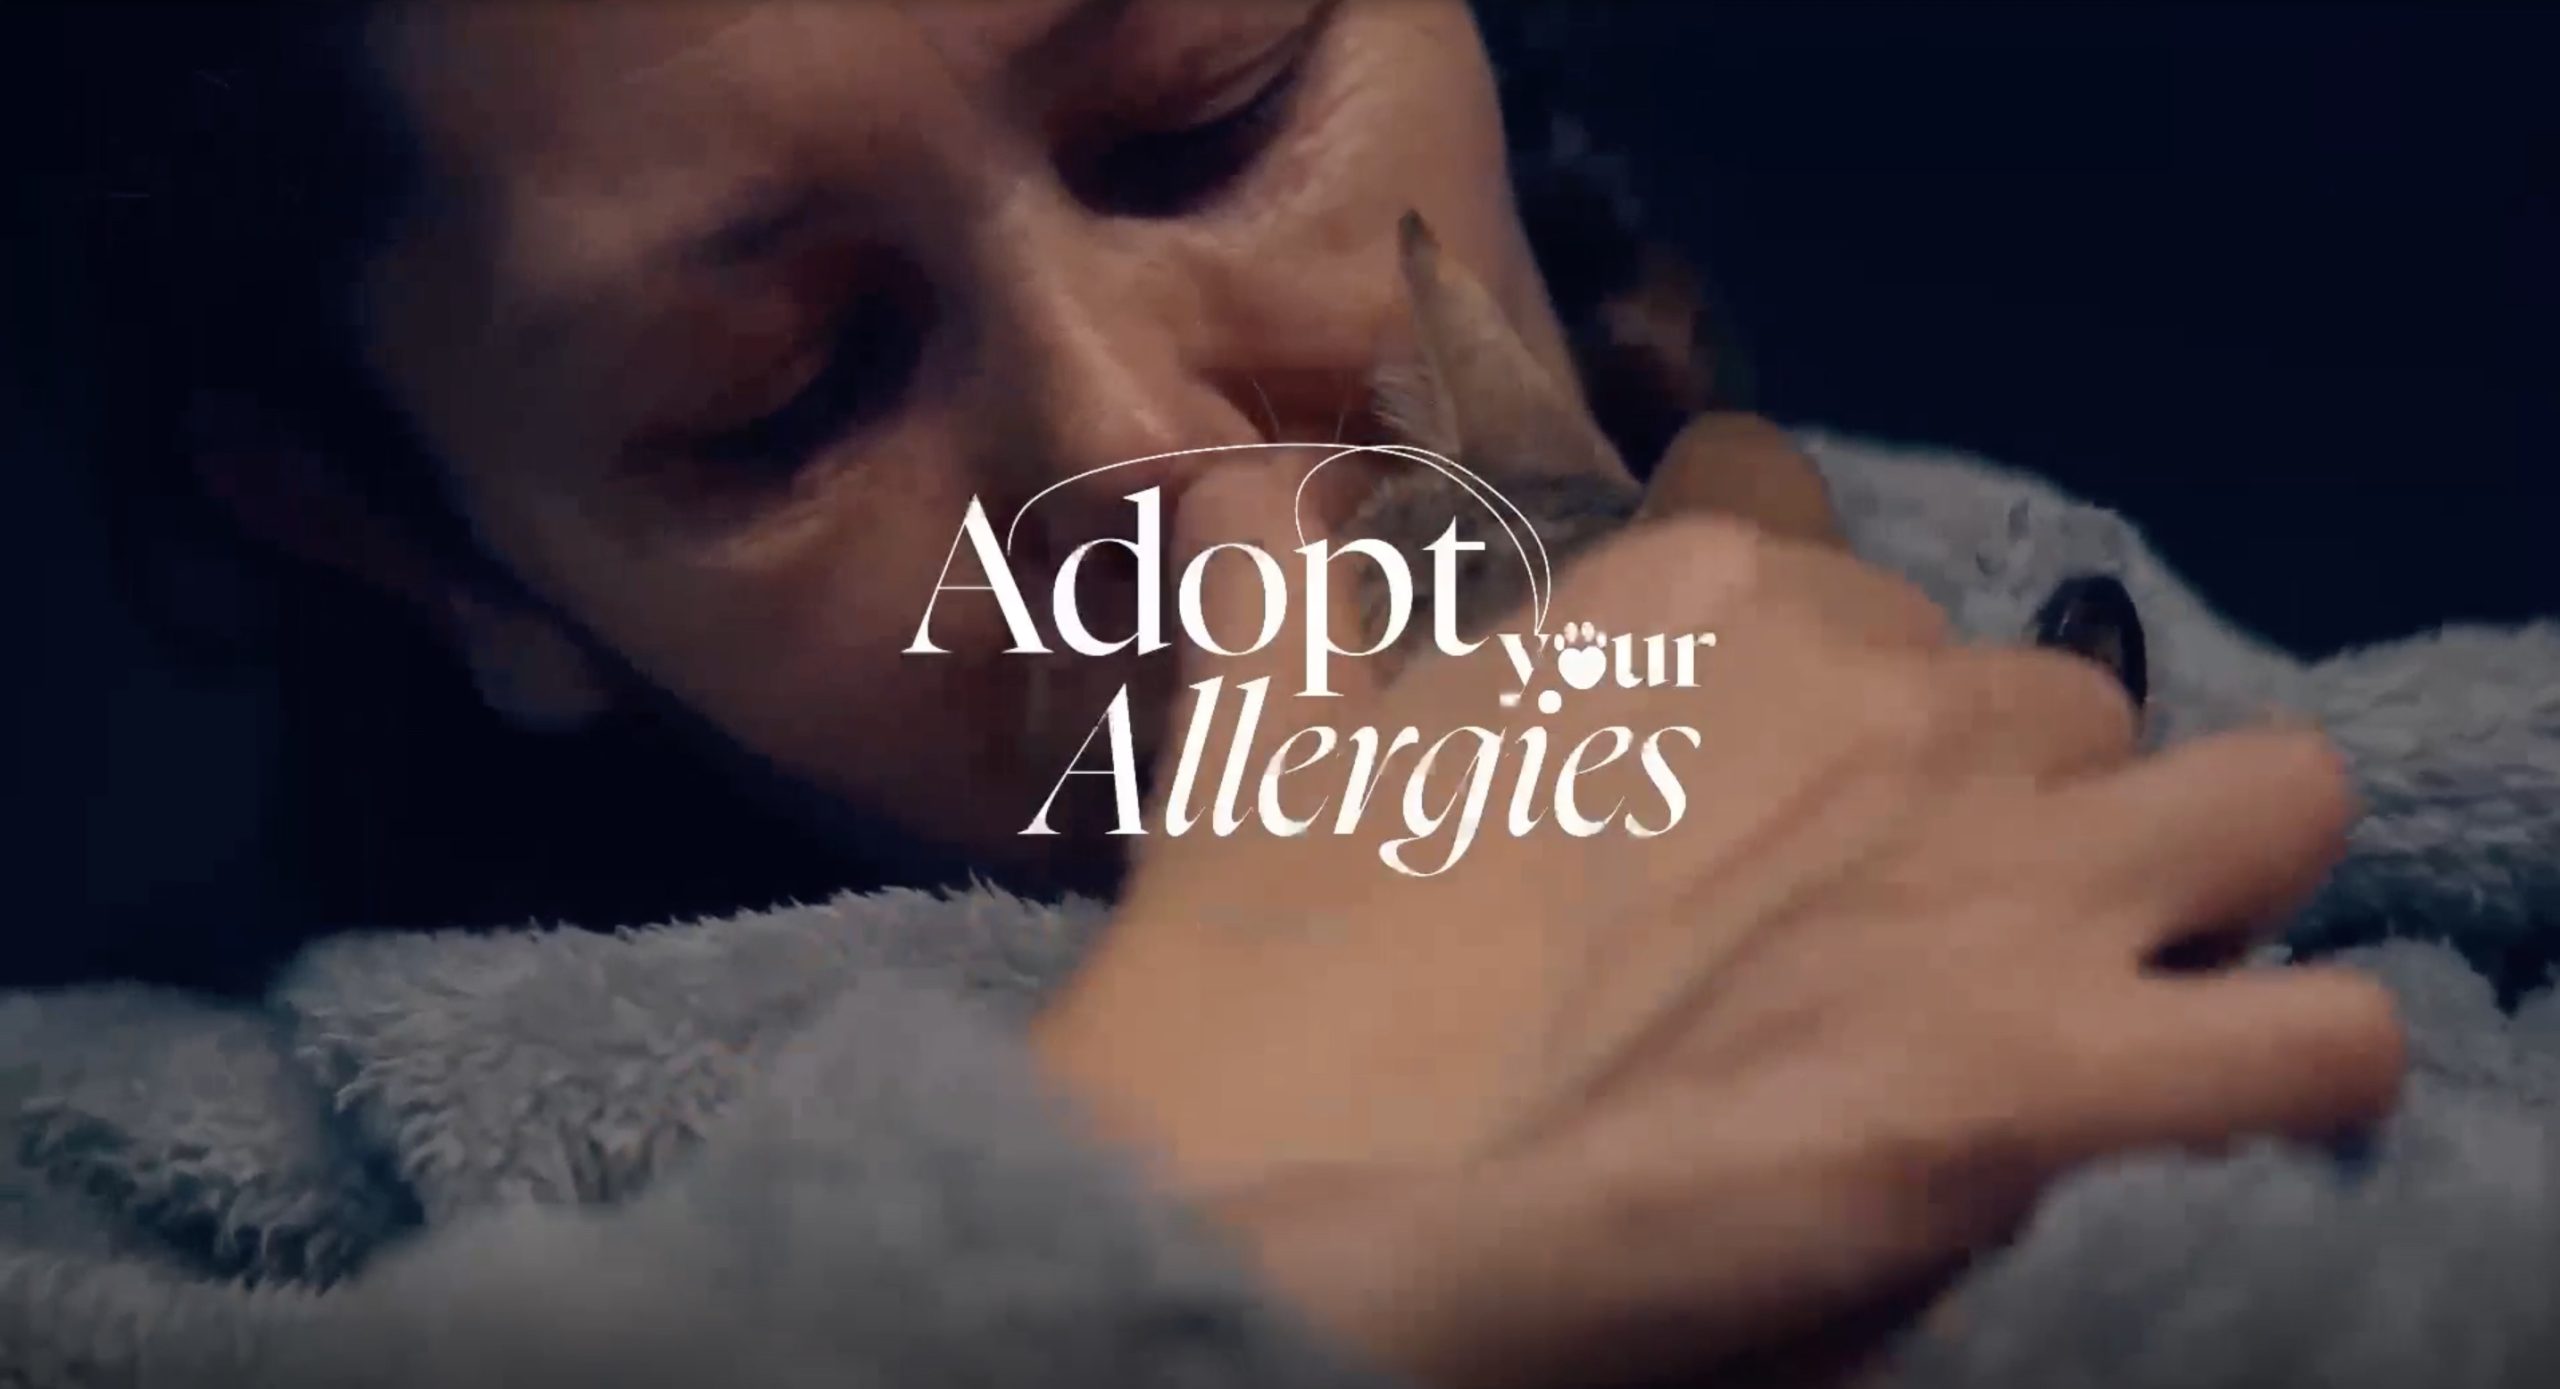 Adopt your Allergies